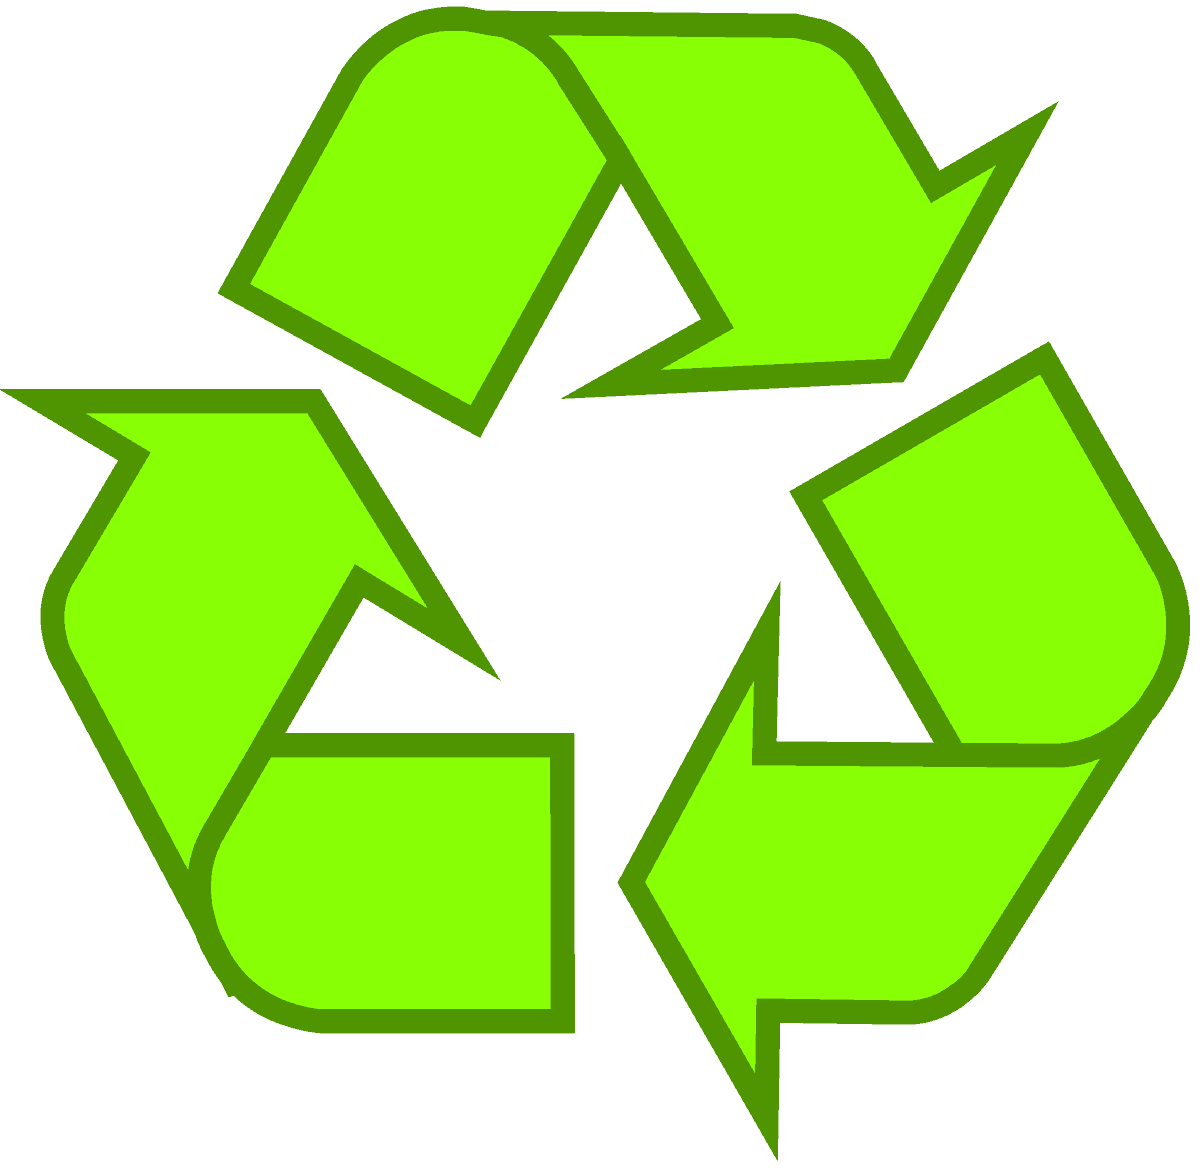 Download Recycling Symbol The Original Recycle Logo